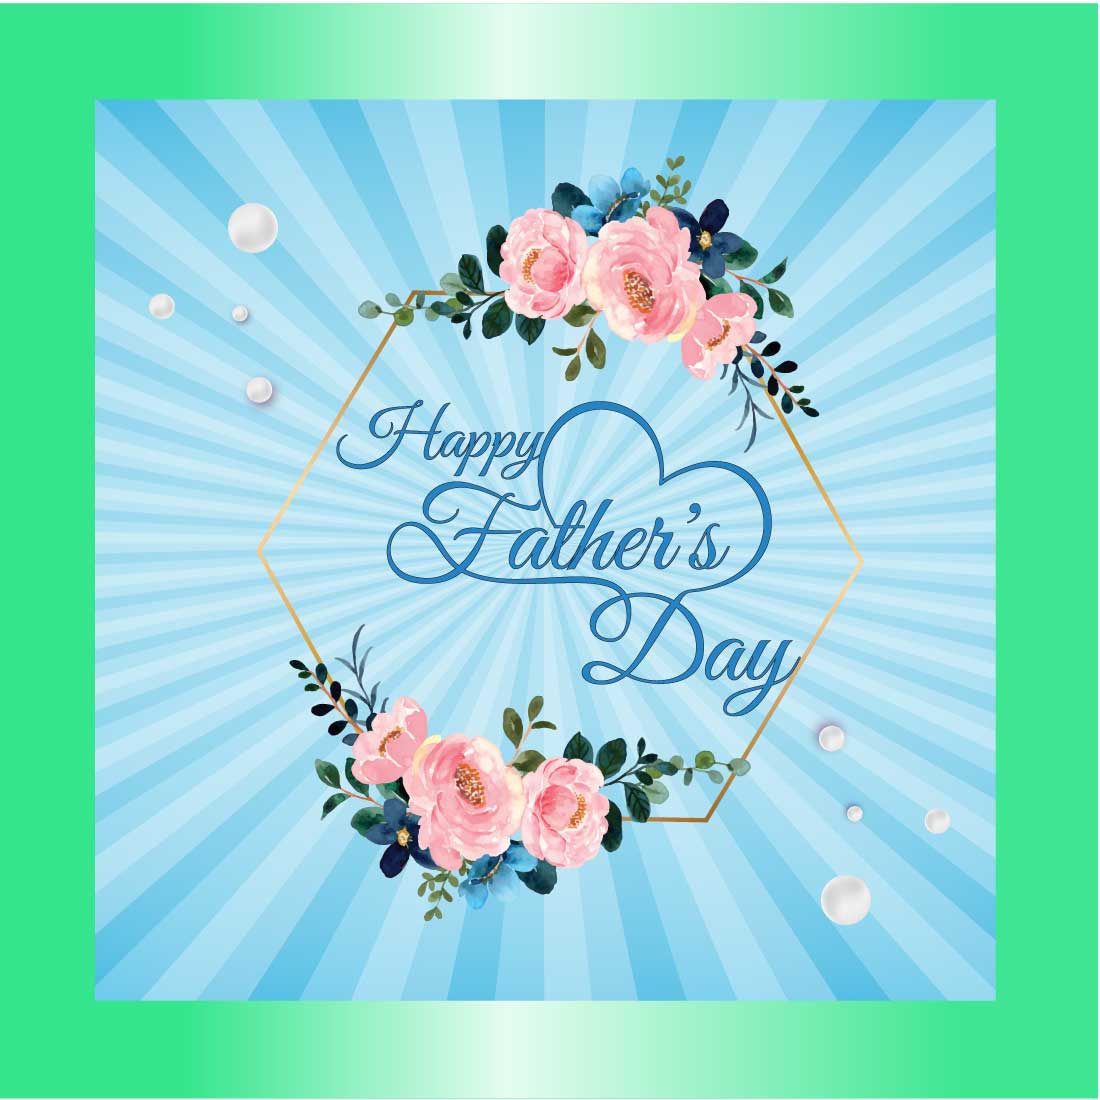 HAPPY FATHER'S DAY 2023 ,,floral greeting card preview image.